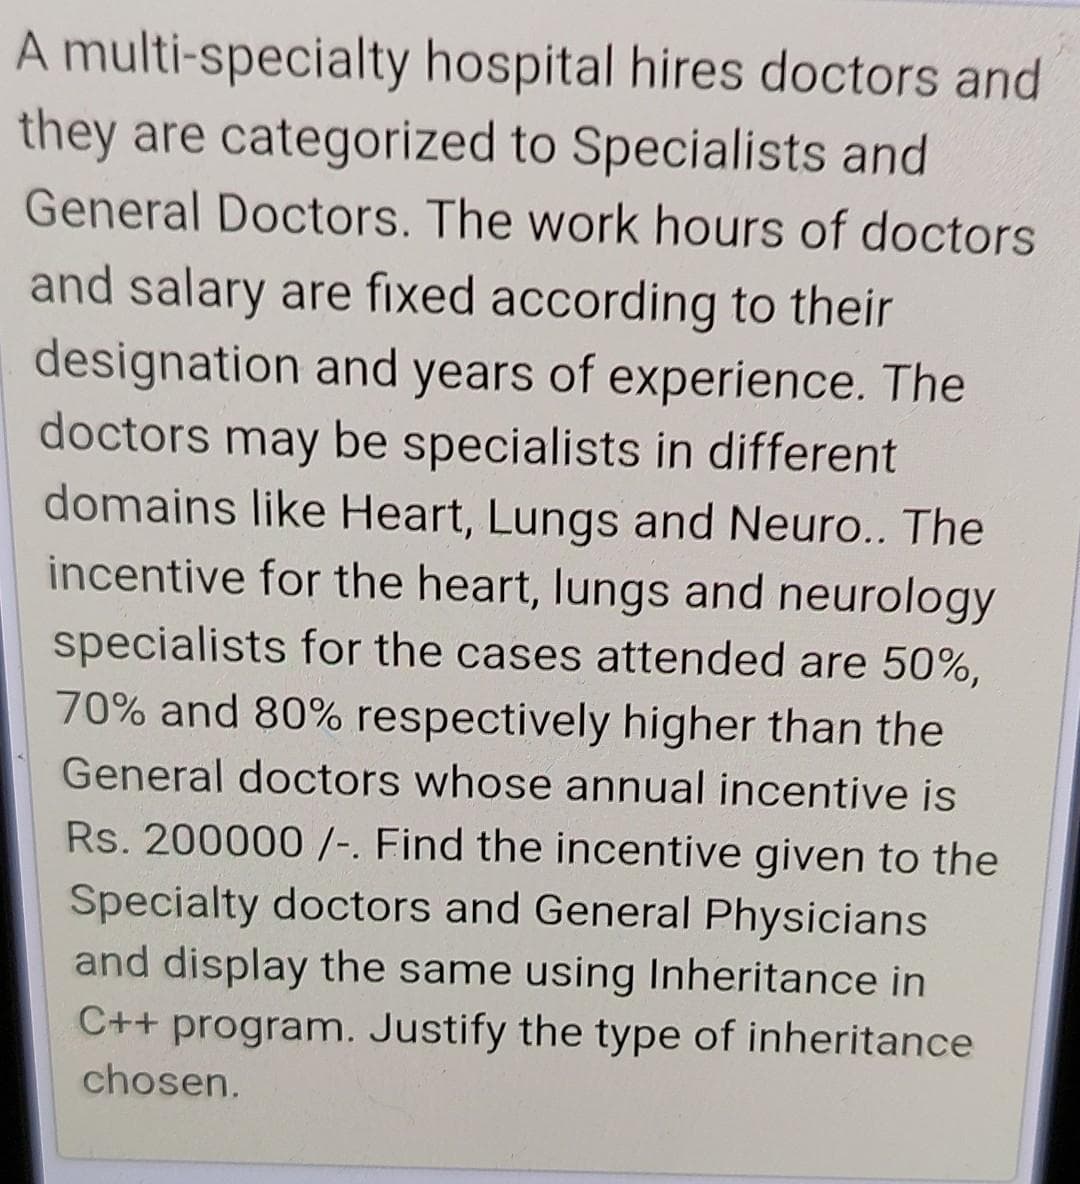 A multi-specialty hospital hires doctors and
they are categorized to Specialists and
General Doctors. The work hours of doctors
and salary are fixed according to their
designation and years of experience. The
doctors may be specialists in different
domains like Heart, Lungs and Neuro.. The
incentive for the heart, lungs and neurology
specialists for the cases attended are 50%,
70% and 80% respectively higher than the
General doctors whose annual incentive is
Rs. 200000 /-. Find the incentive given to the
Specialty doctors and General Physicians
and display the same using Inheritance in
C++ program. Justify the type of inheritance
chosen.
